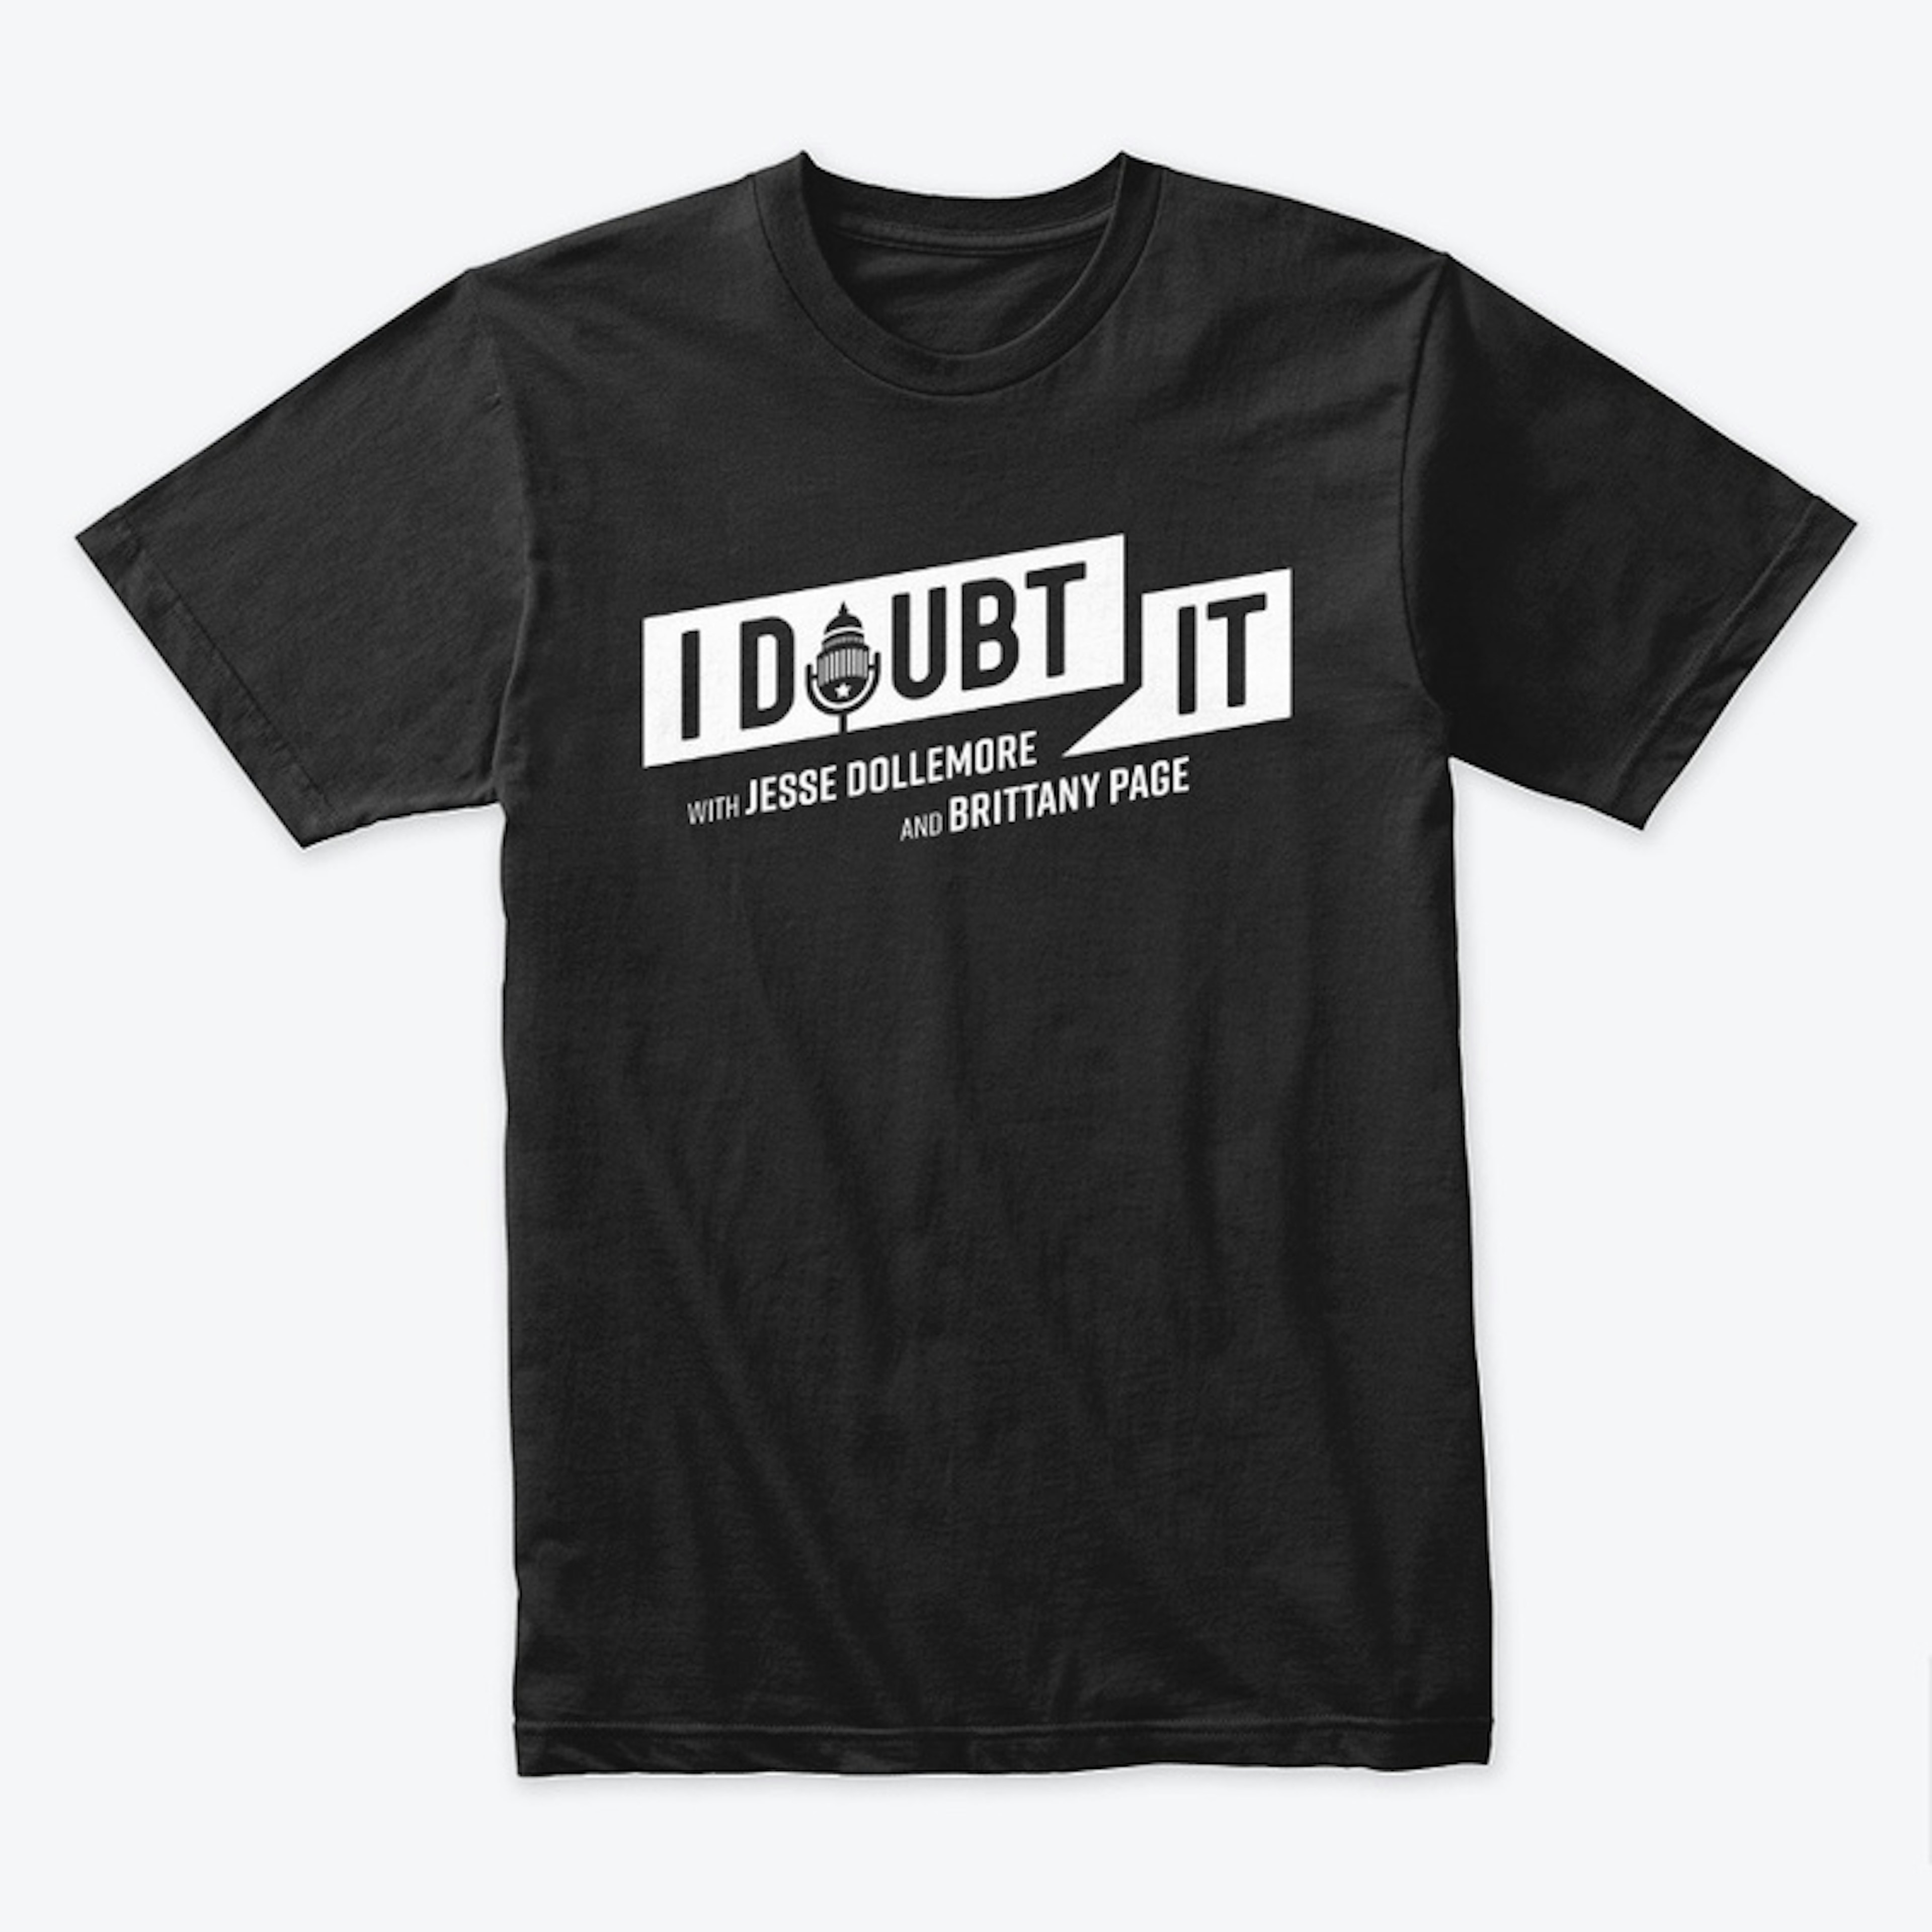 I Doubt It Podcast Tees